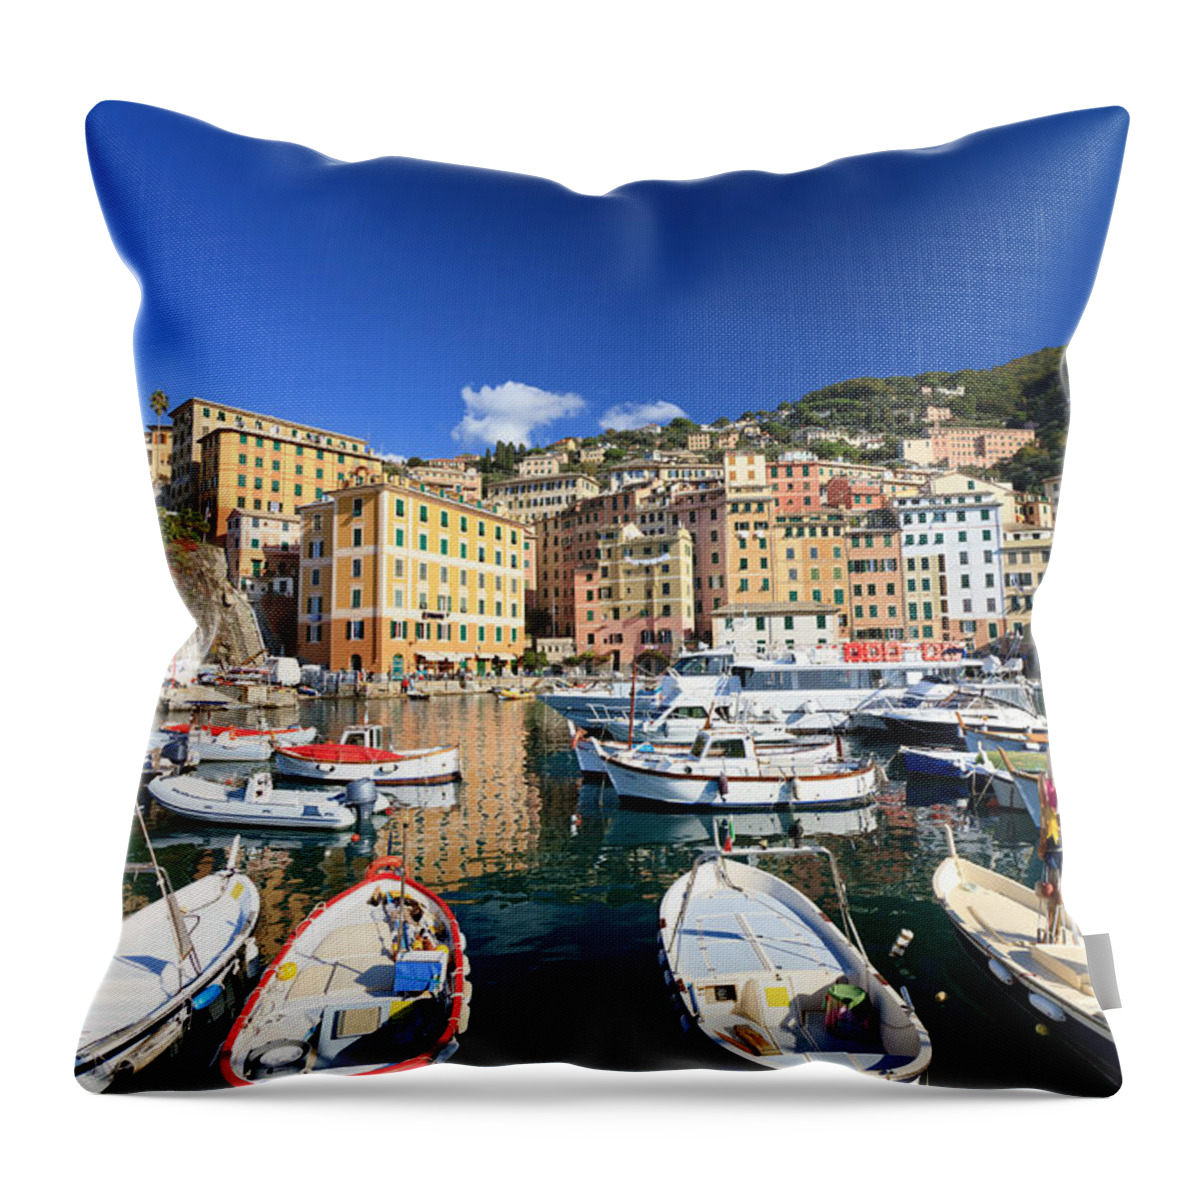 Architecture Throw Pillow featuring the photograph Harbor With Fishing Boats by Antonio Scarpi